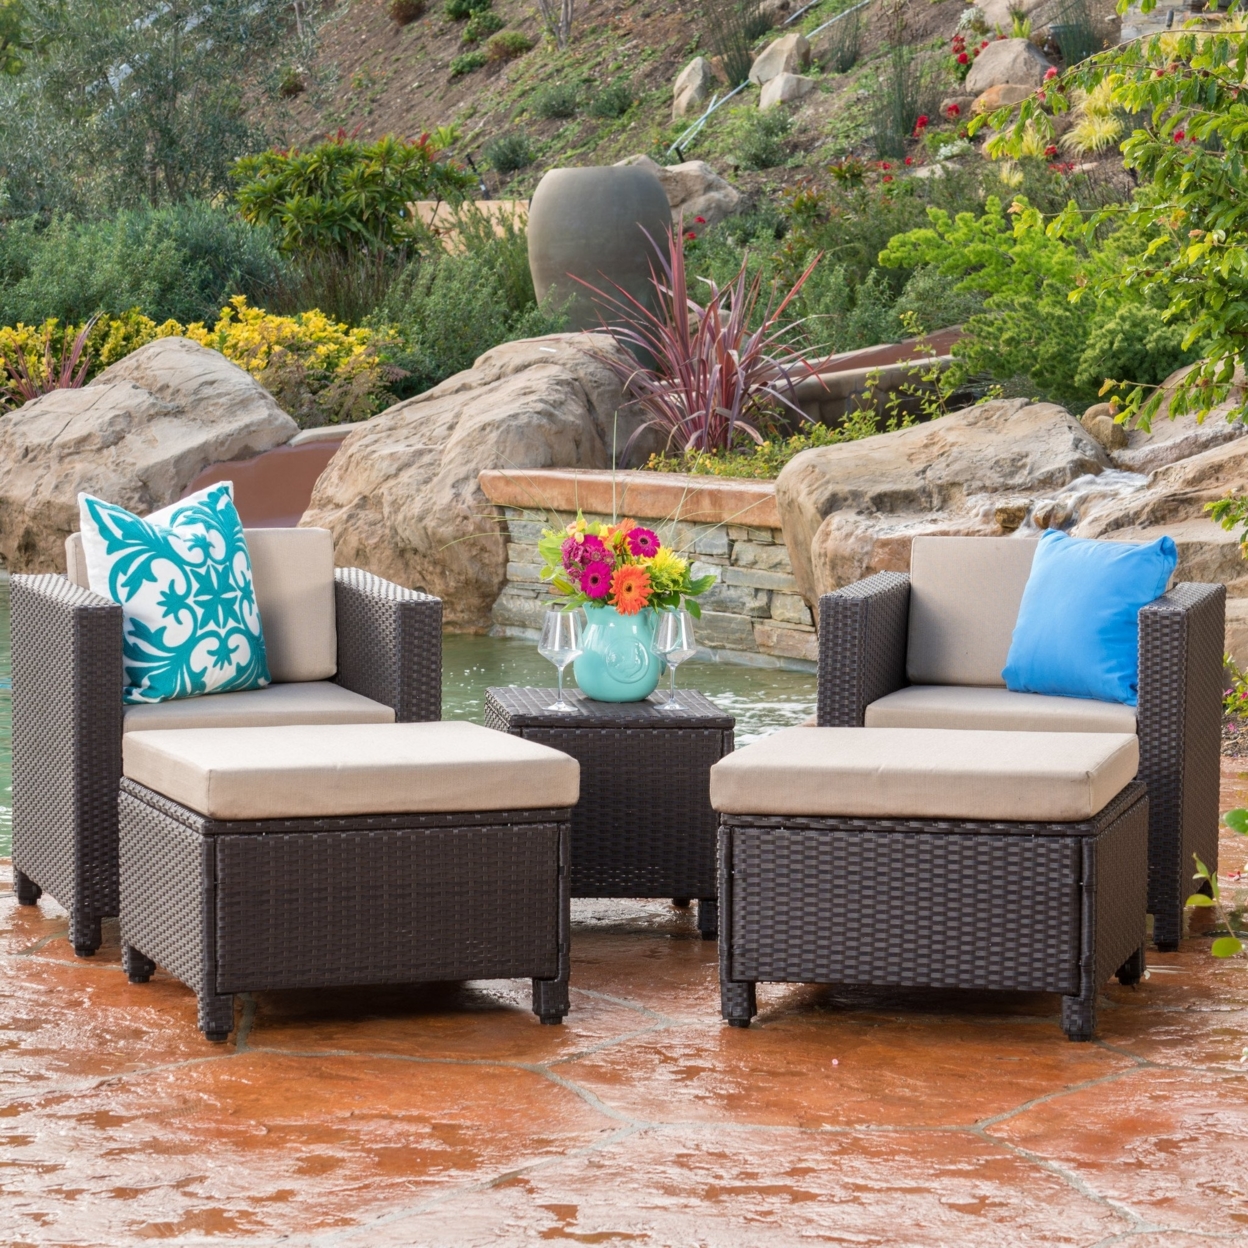 Budva Outdoor 5pc Chat Set With Cushions - Black/Gray Wicker